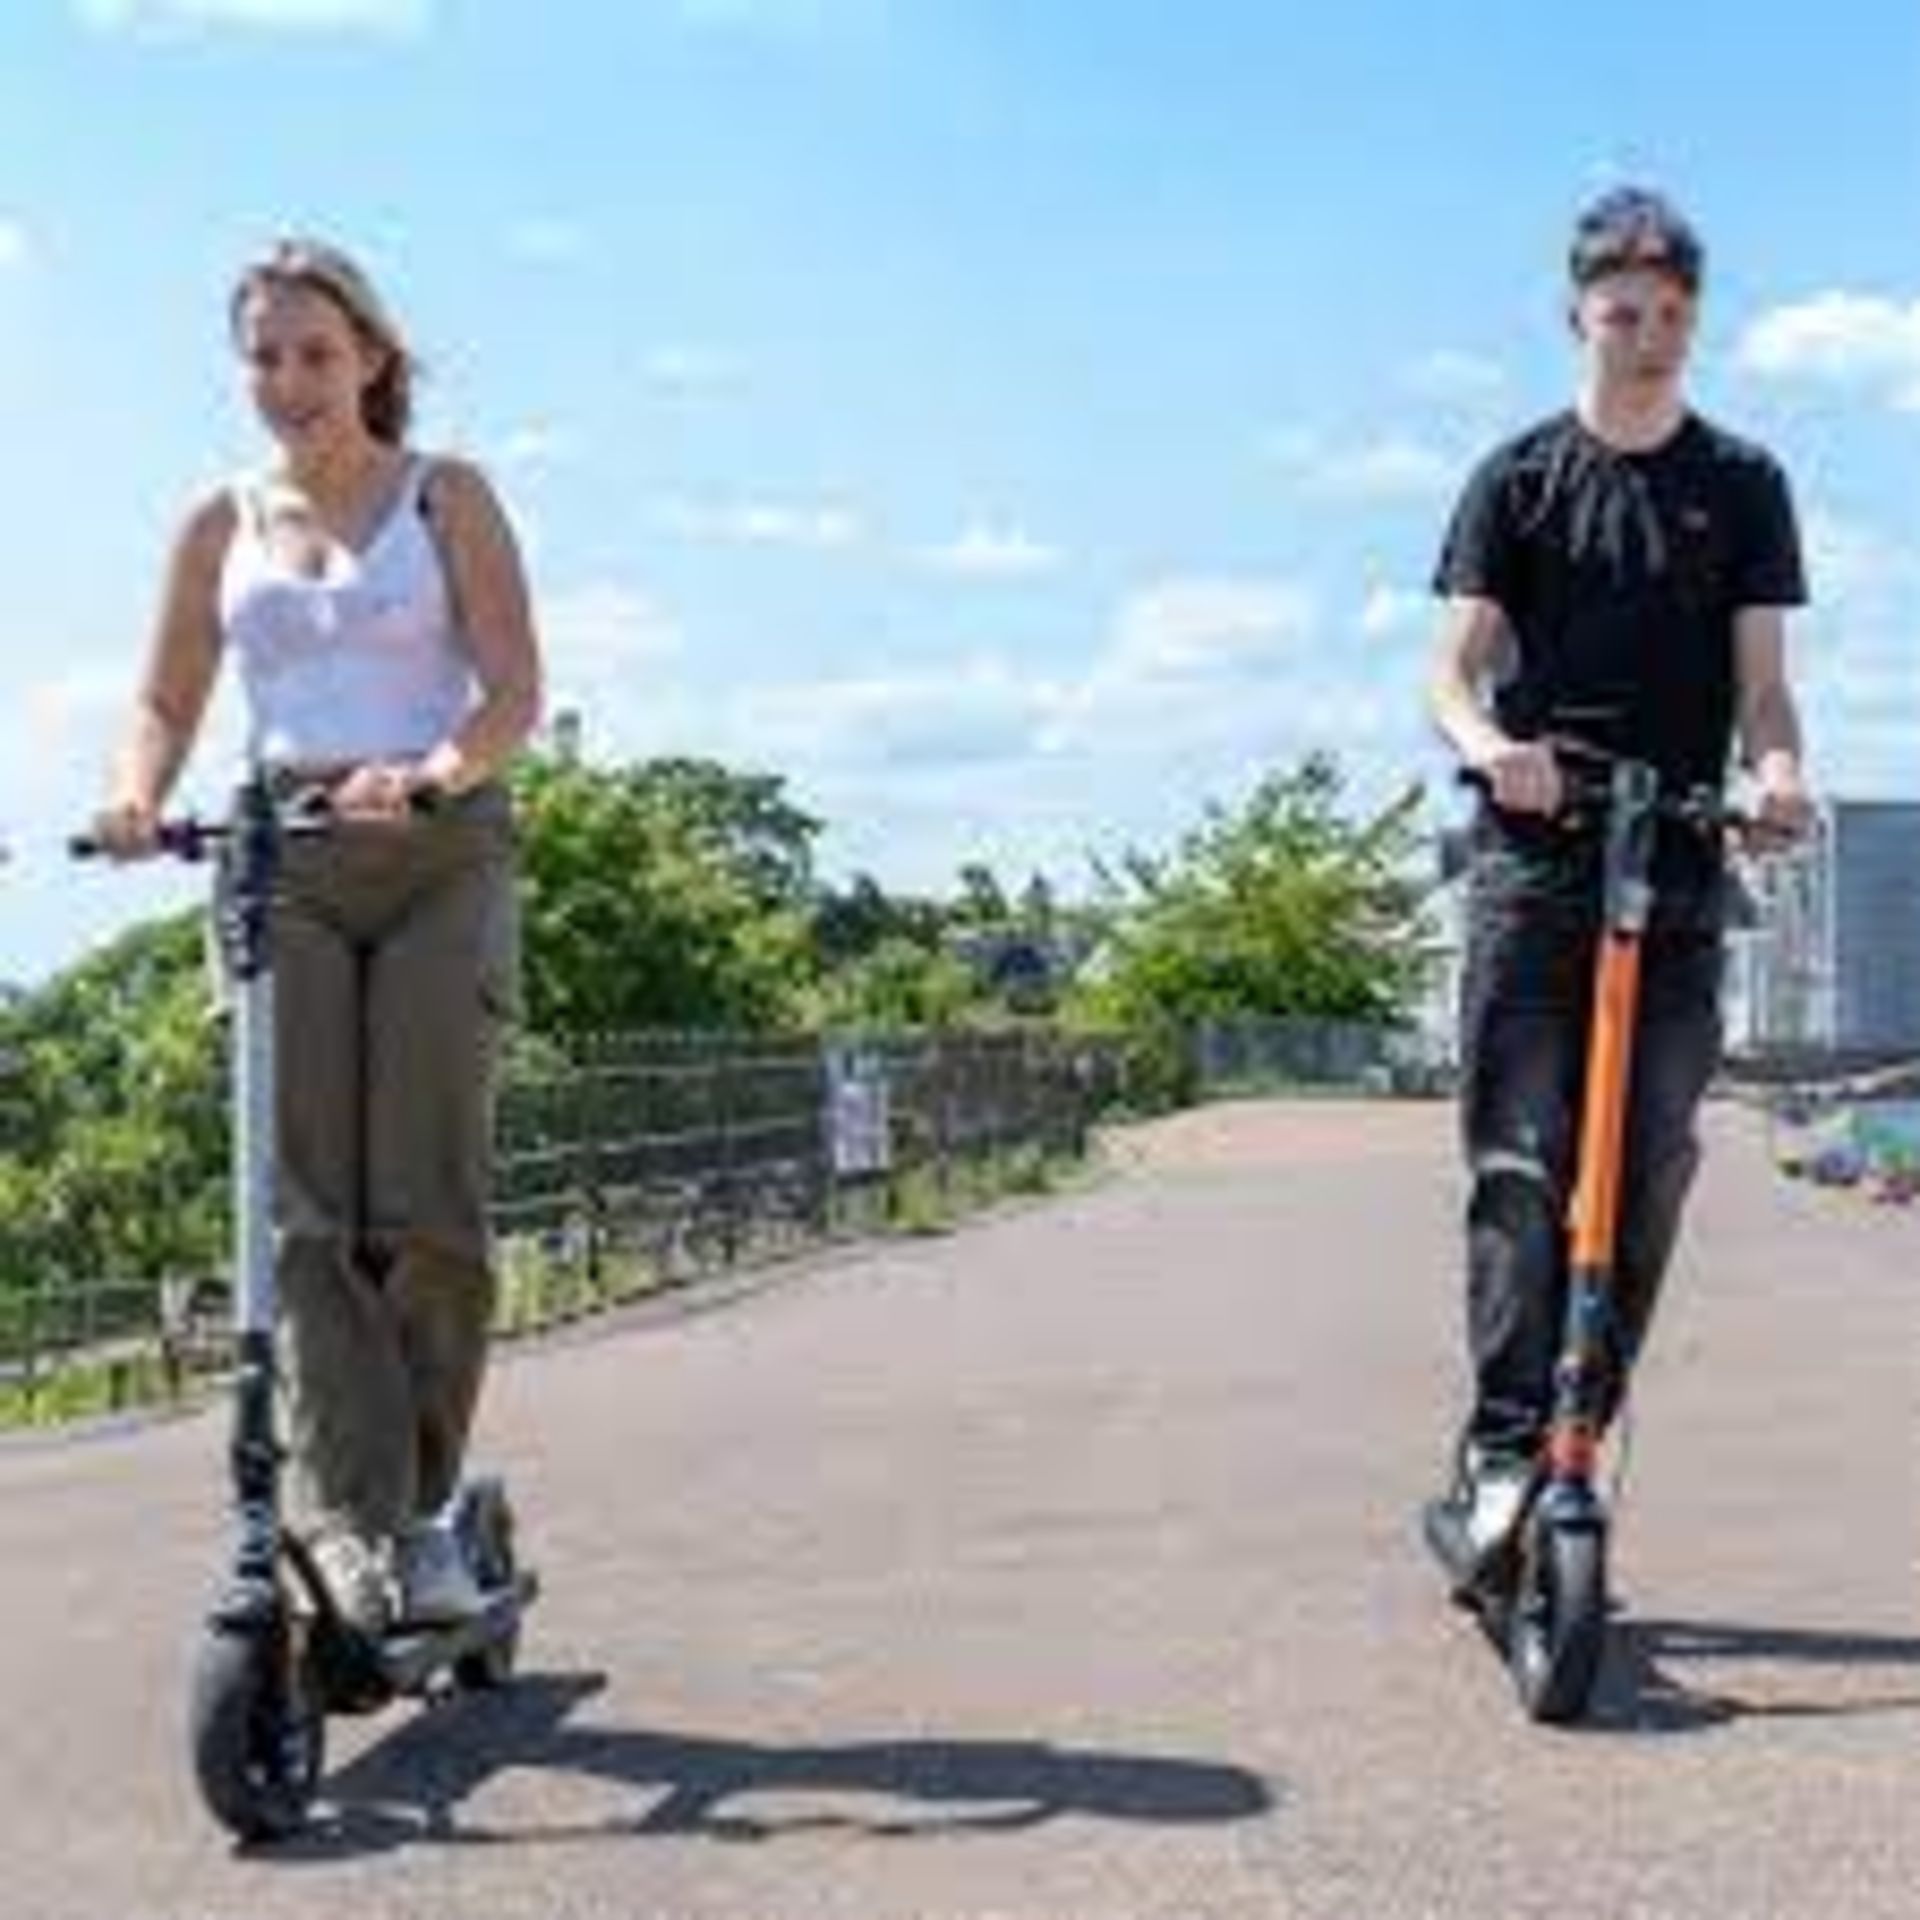 Trade Lot 4 x Brand New E-Glide V2 Electric Scooter Grey and Black RRP £599, Introducing a sleek and - Image 2 of 3